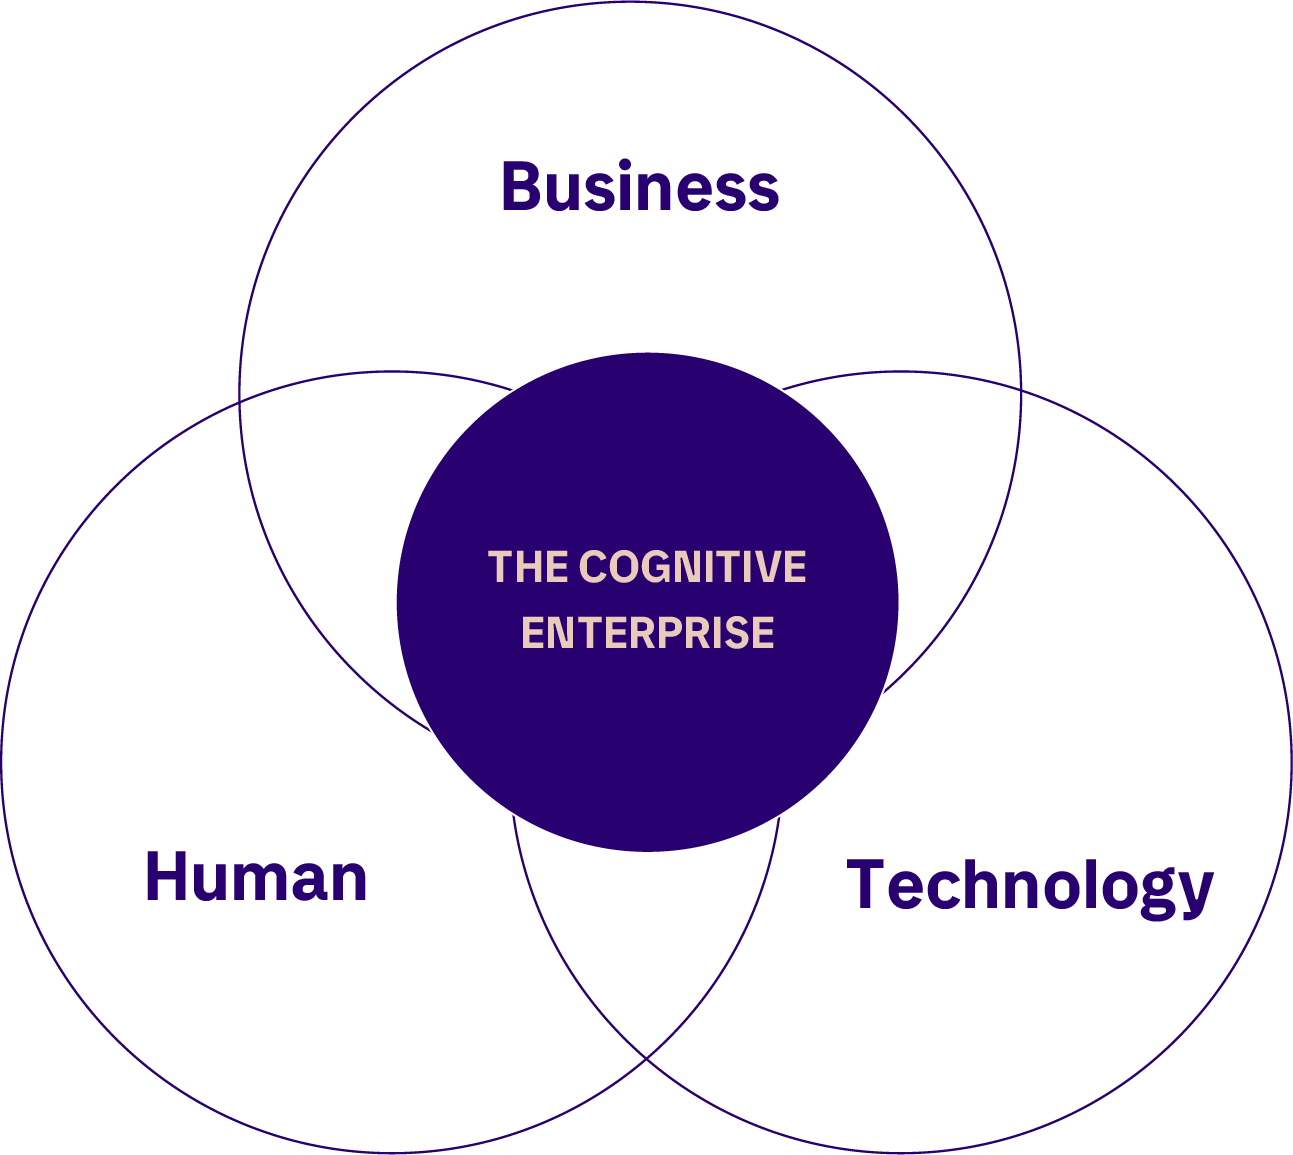 The digital transformation requires a human-centric approach to technology